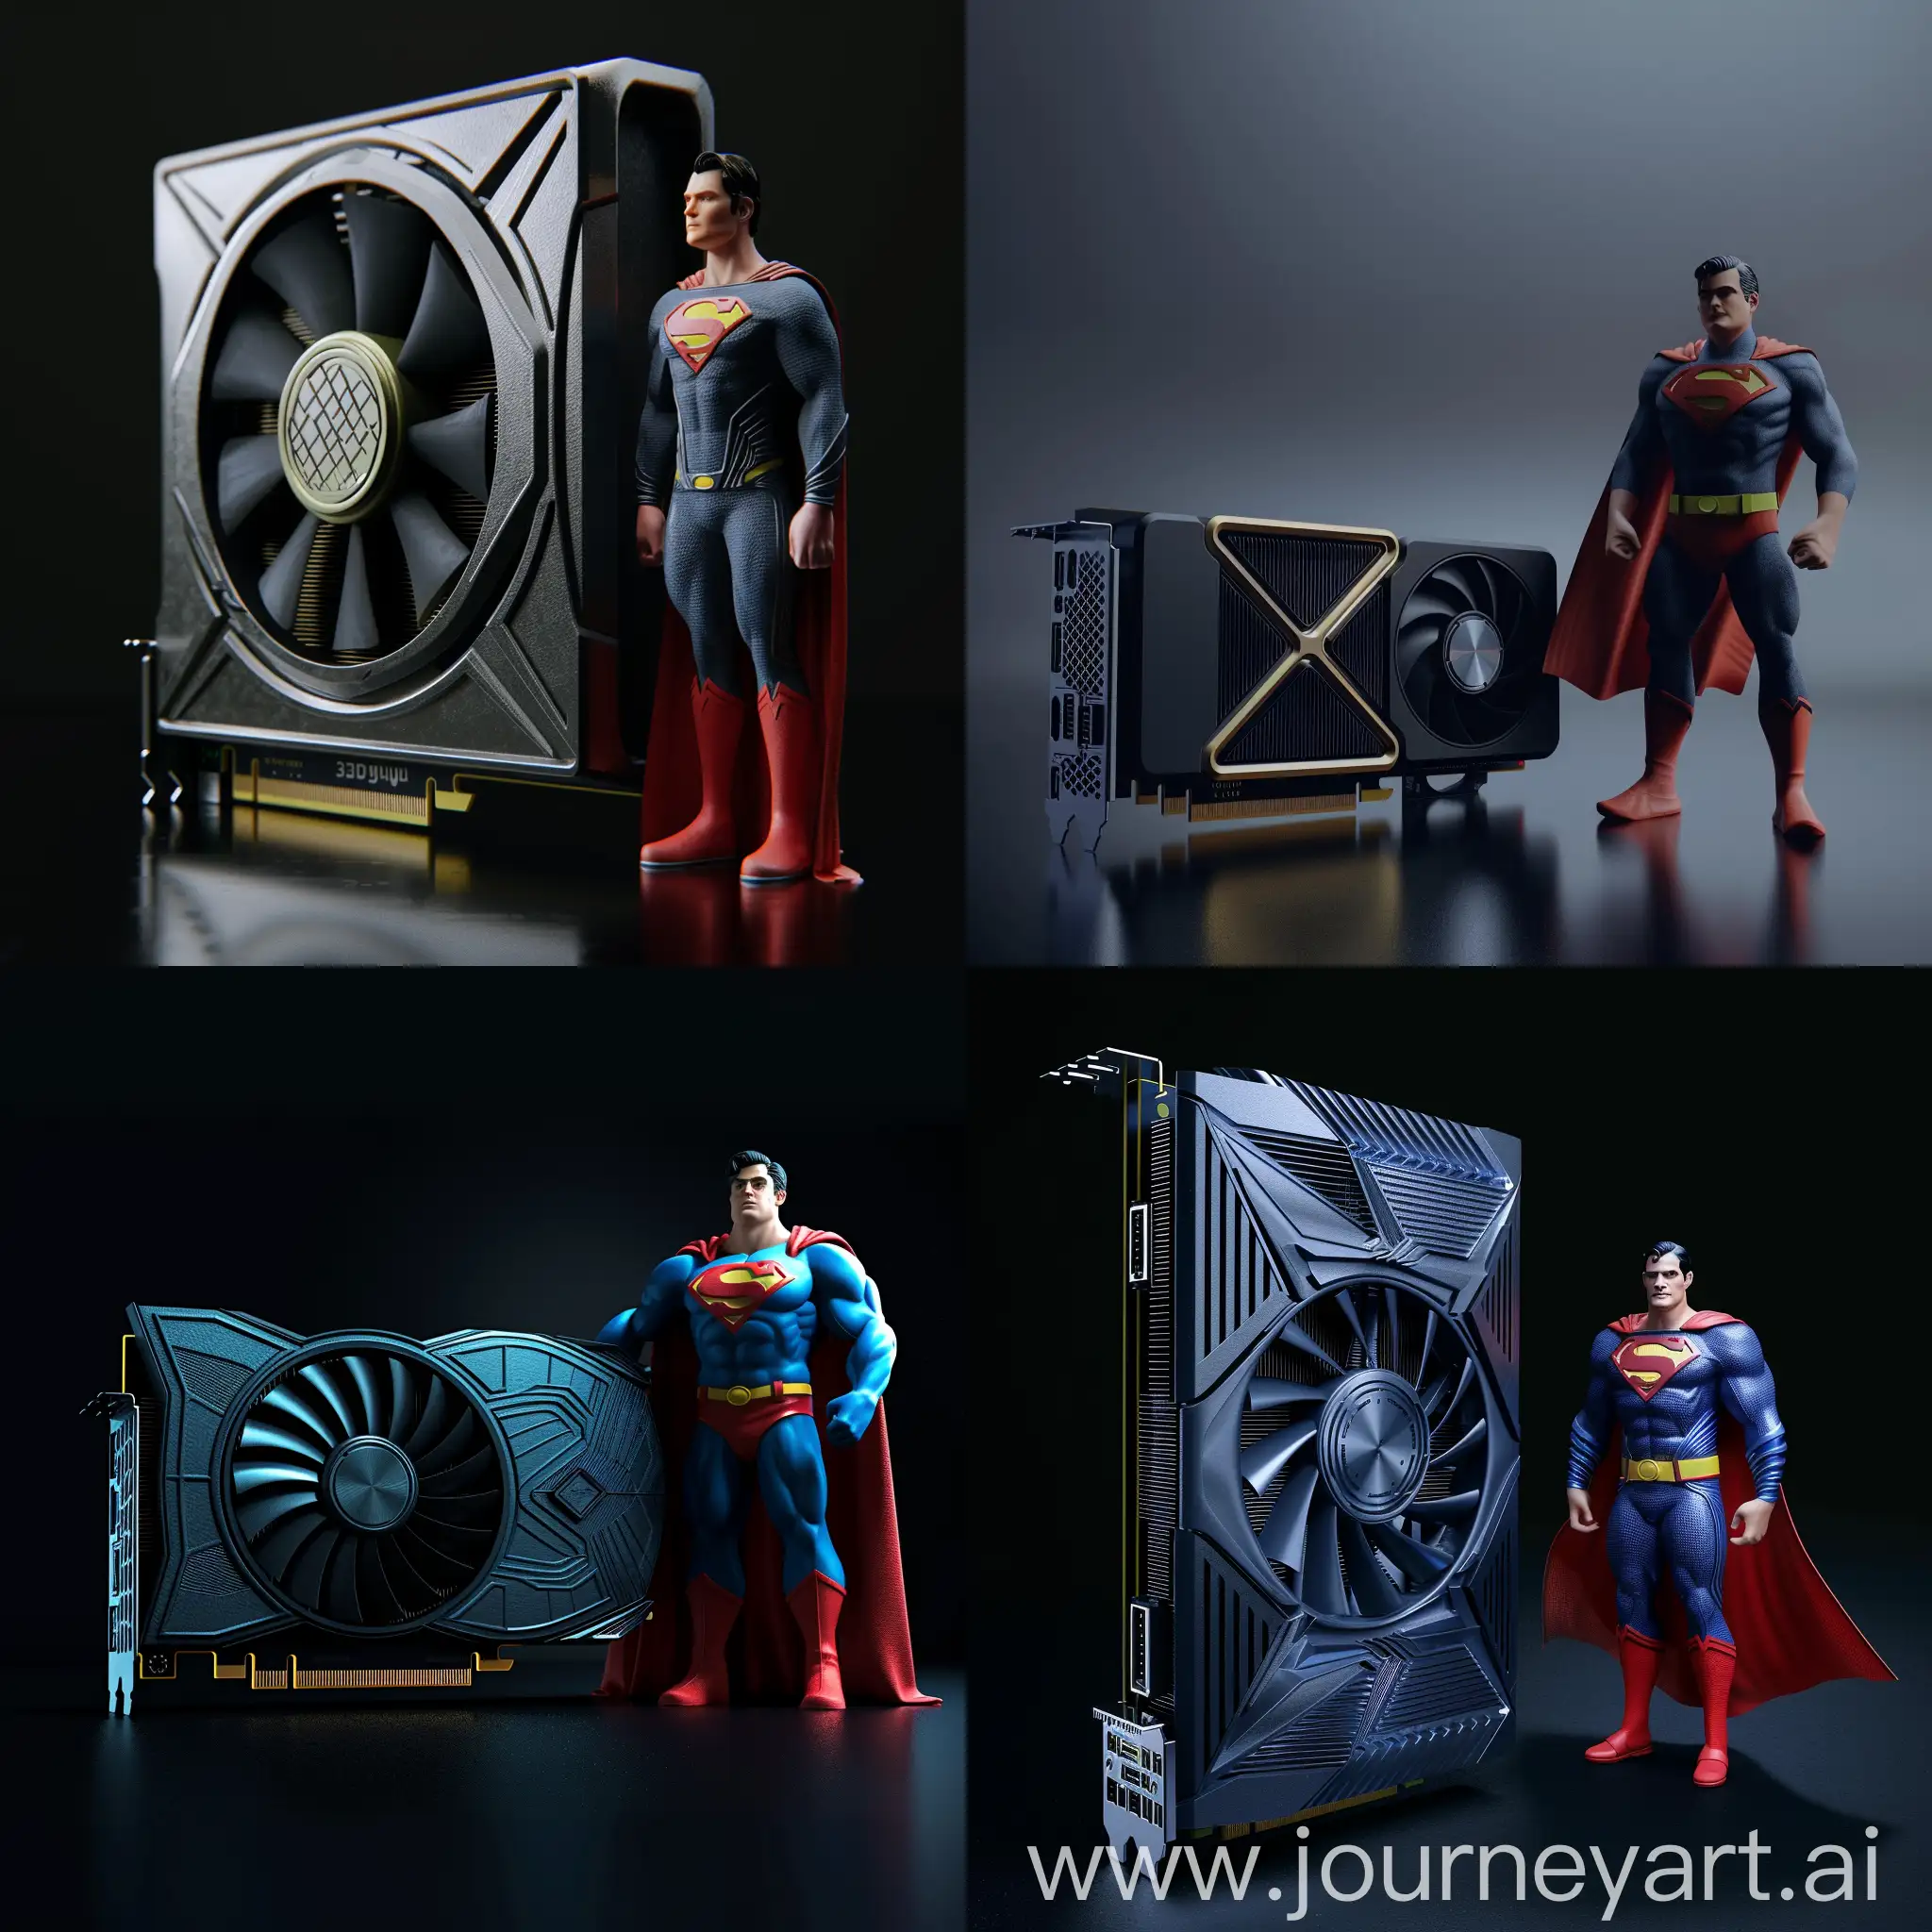 Superman-Pose-with-3D-Graphics-Card-HighTech-Collaboration